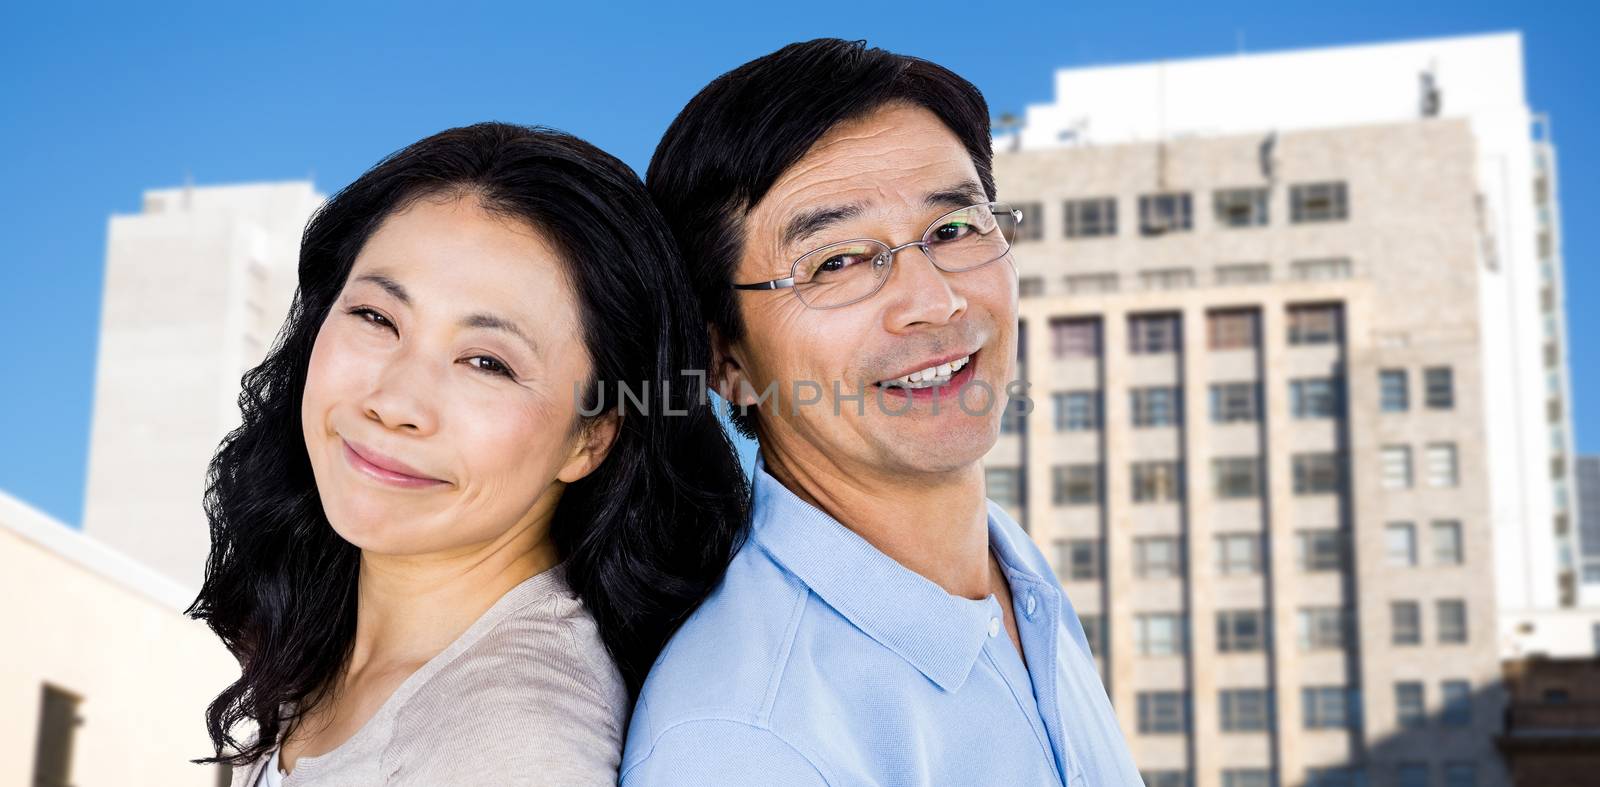 Couple with their backs to each other against low angle view of city buildings